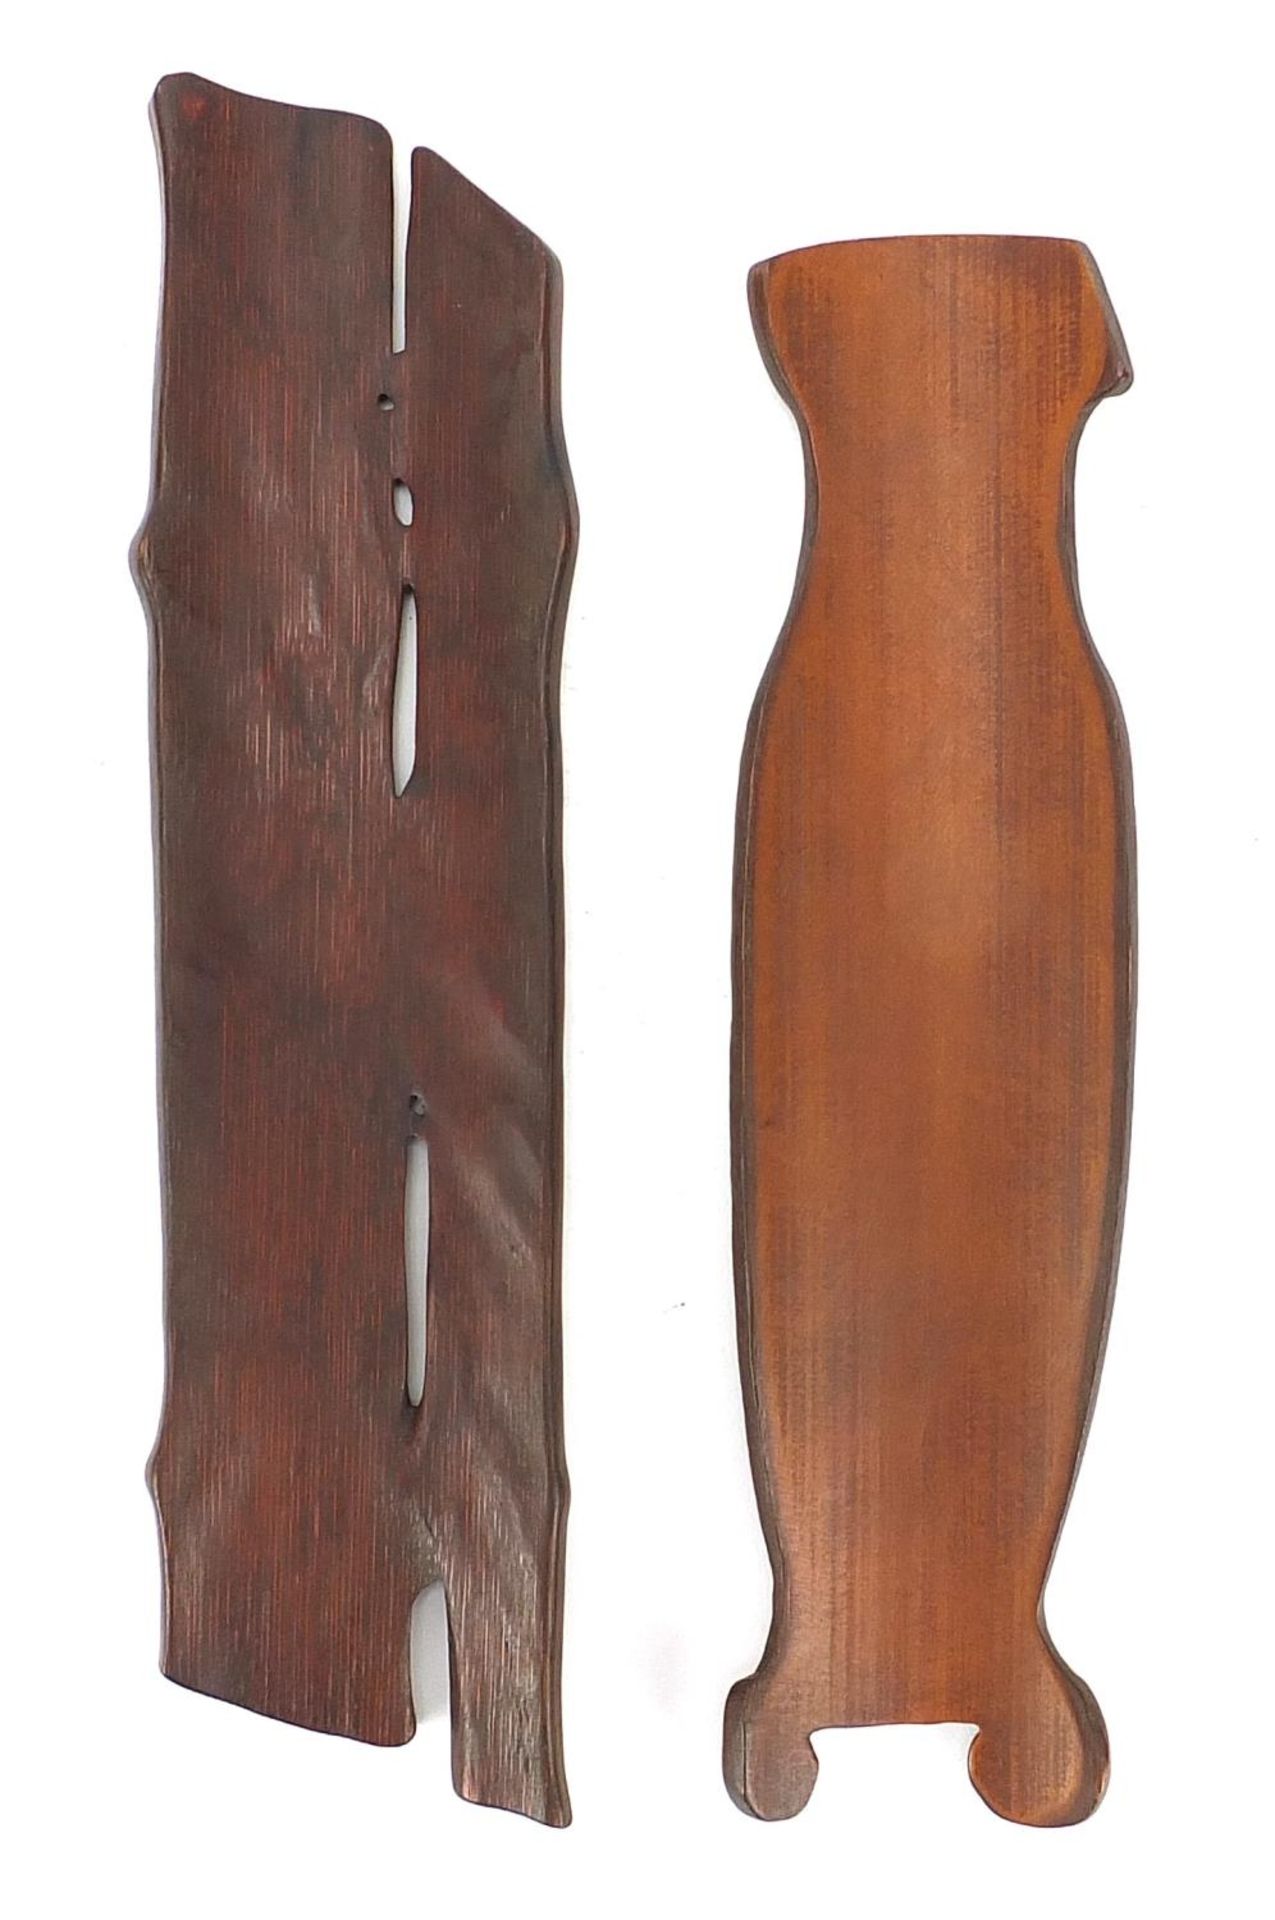 Two Chinese carved bamboo scholar's wrist rests including one in the form of a vase with - Image 4 of 4